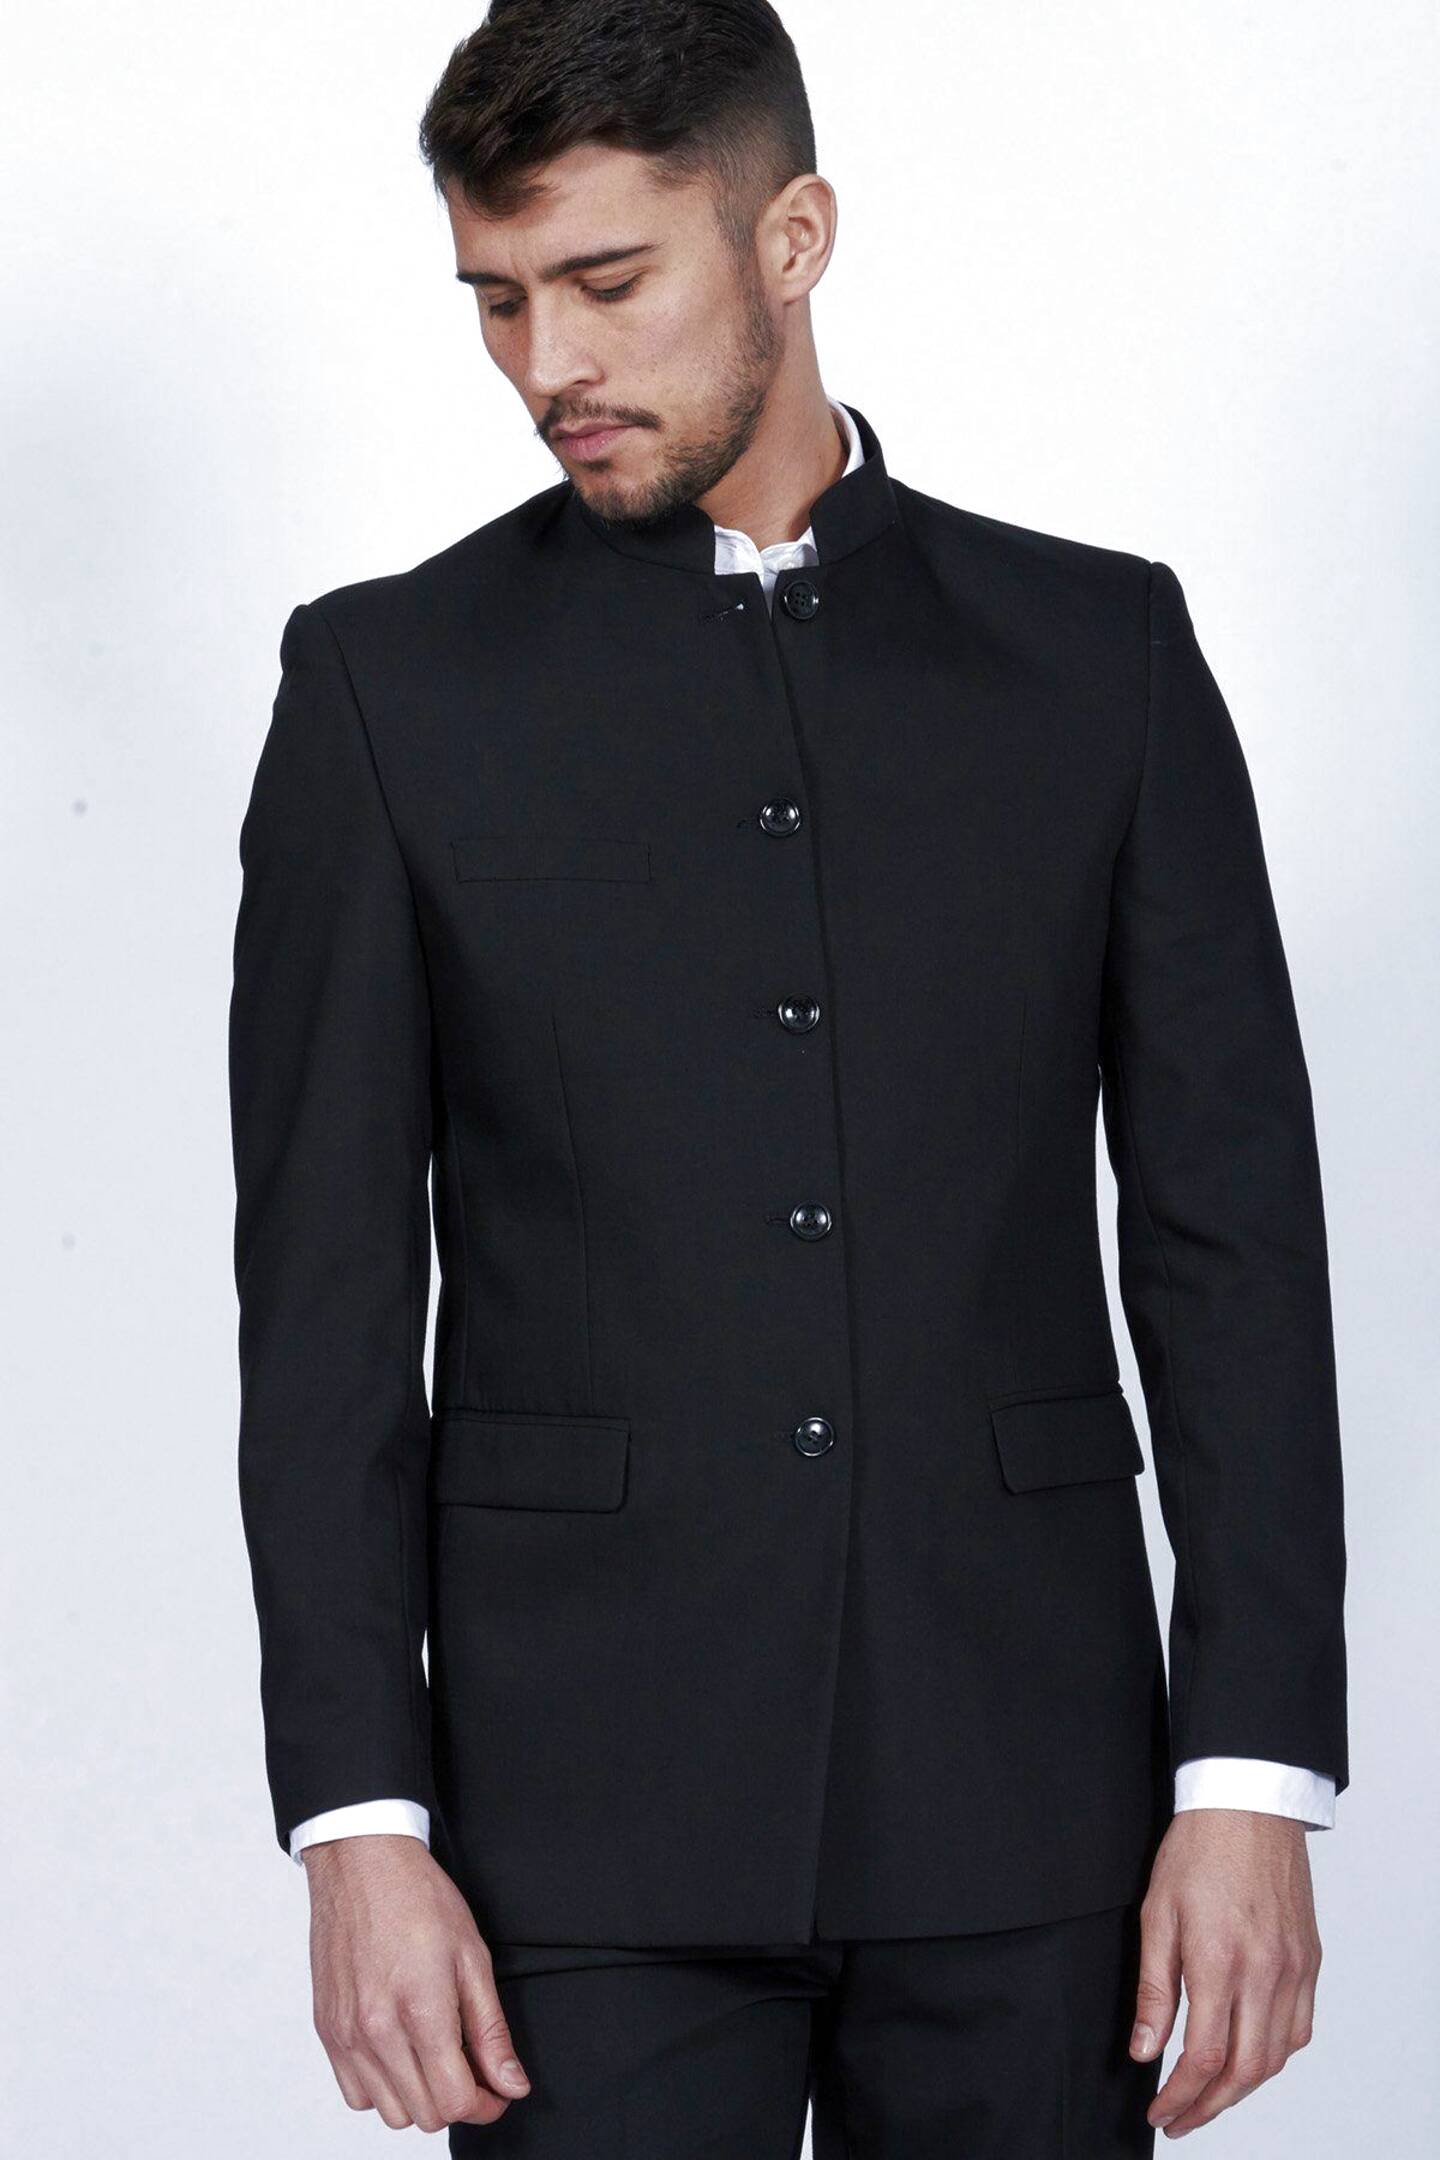 Nehru Suit for sale in UK | 61 used Nehru Suits